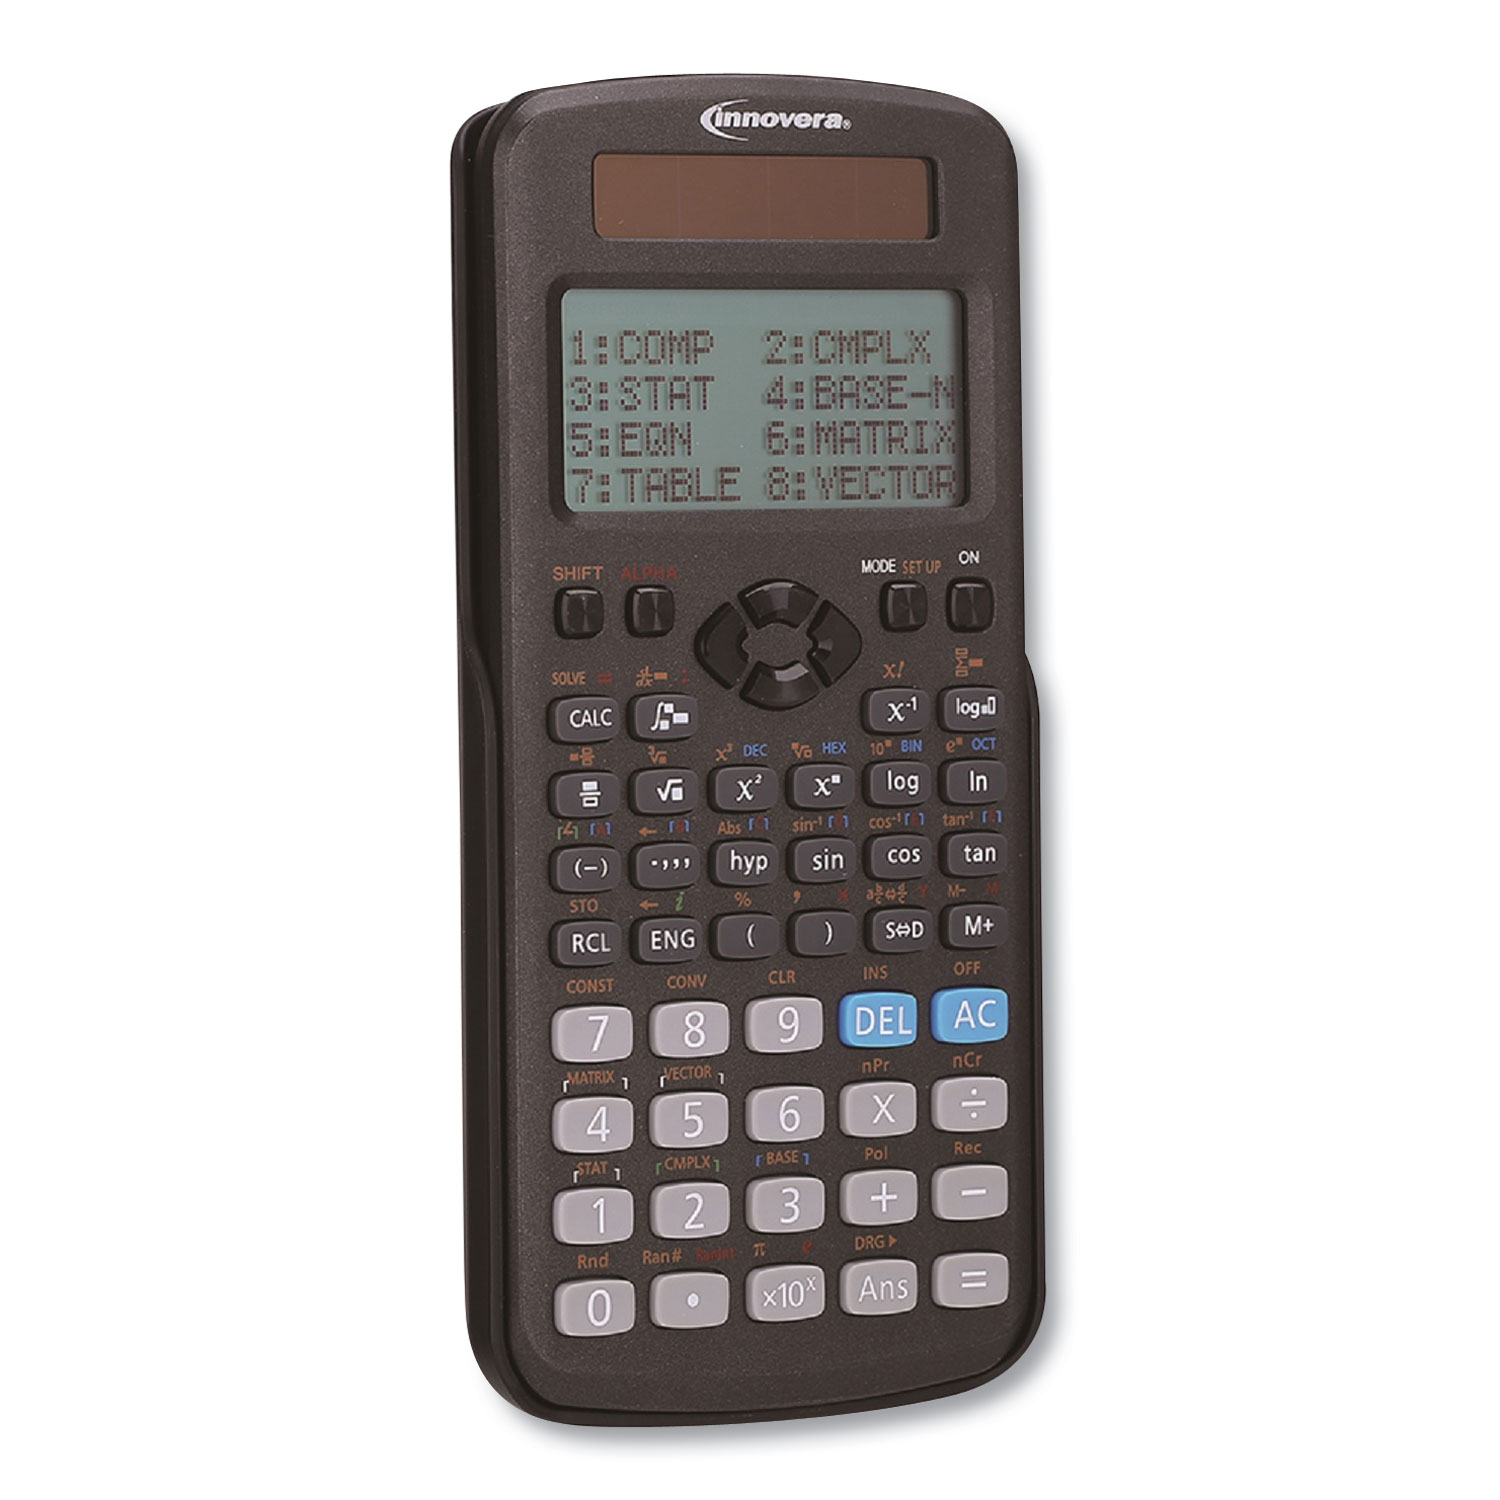 SCIENTIFIFIC CALCULATOR LCD DISPLAY MEMORY FUNCTION AUTO POWER OFF 